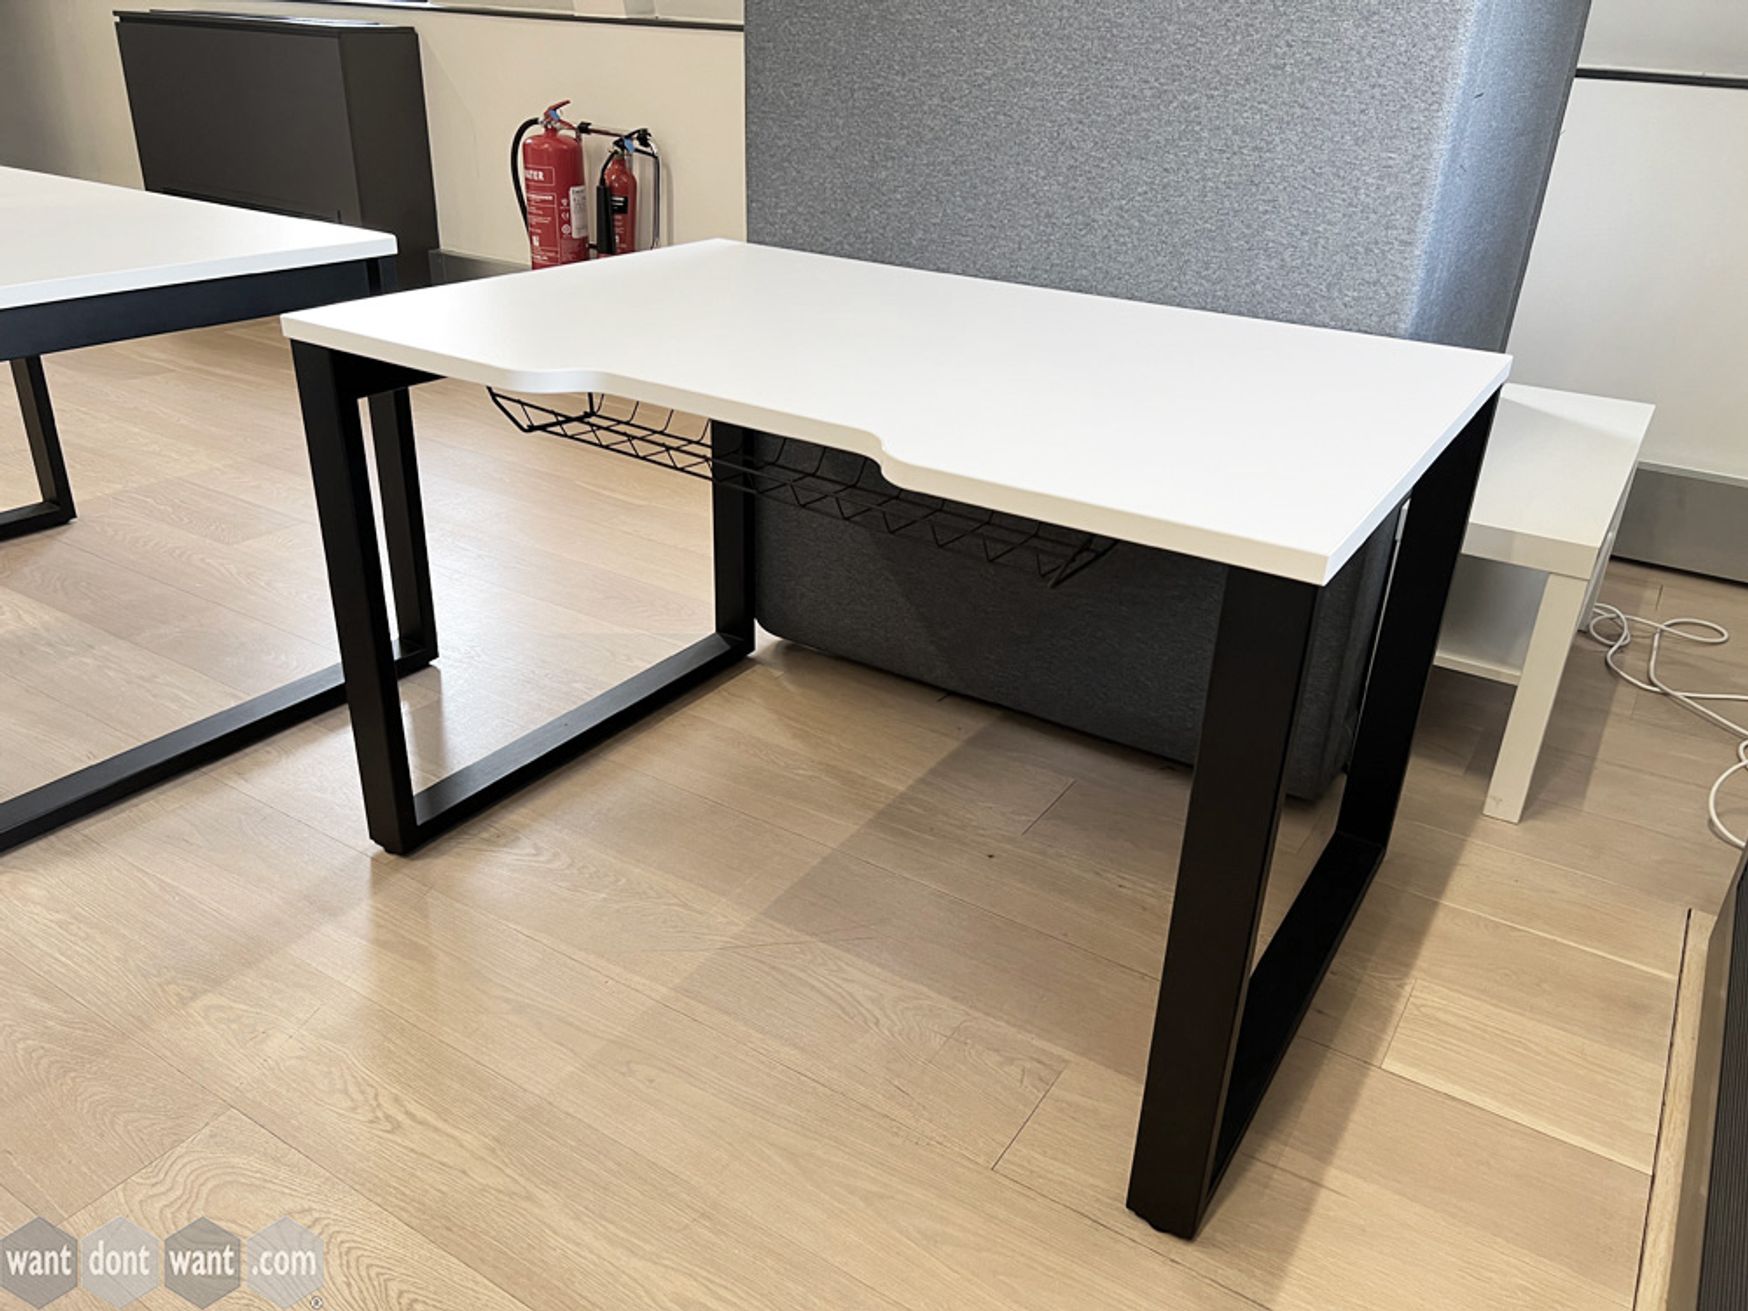 Used white 1200mm wide free-standing white desks with black steel legs.